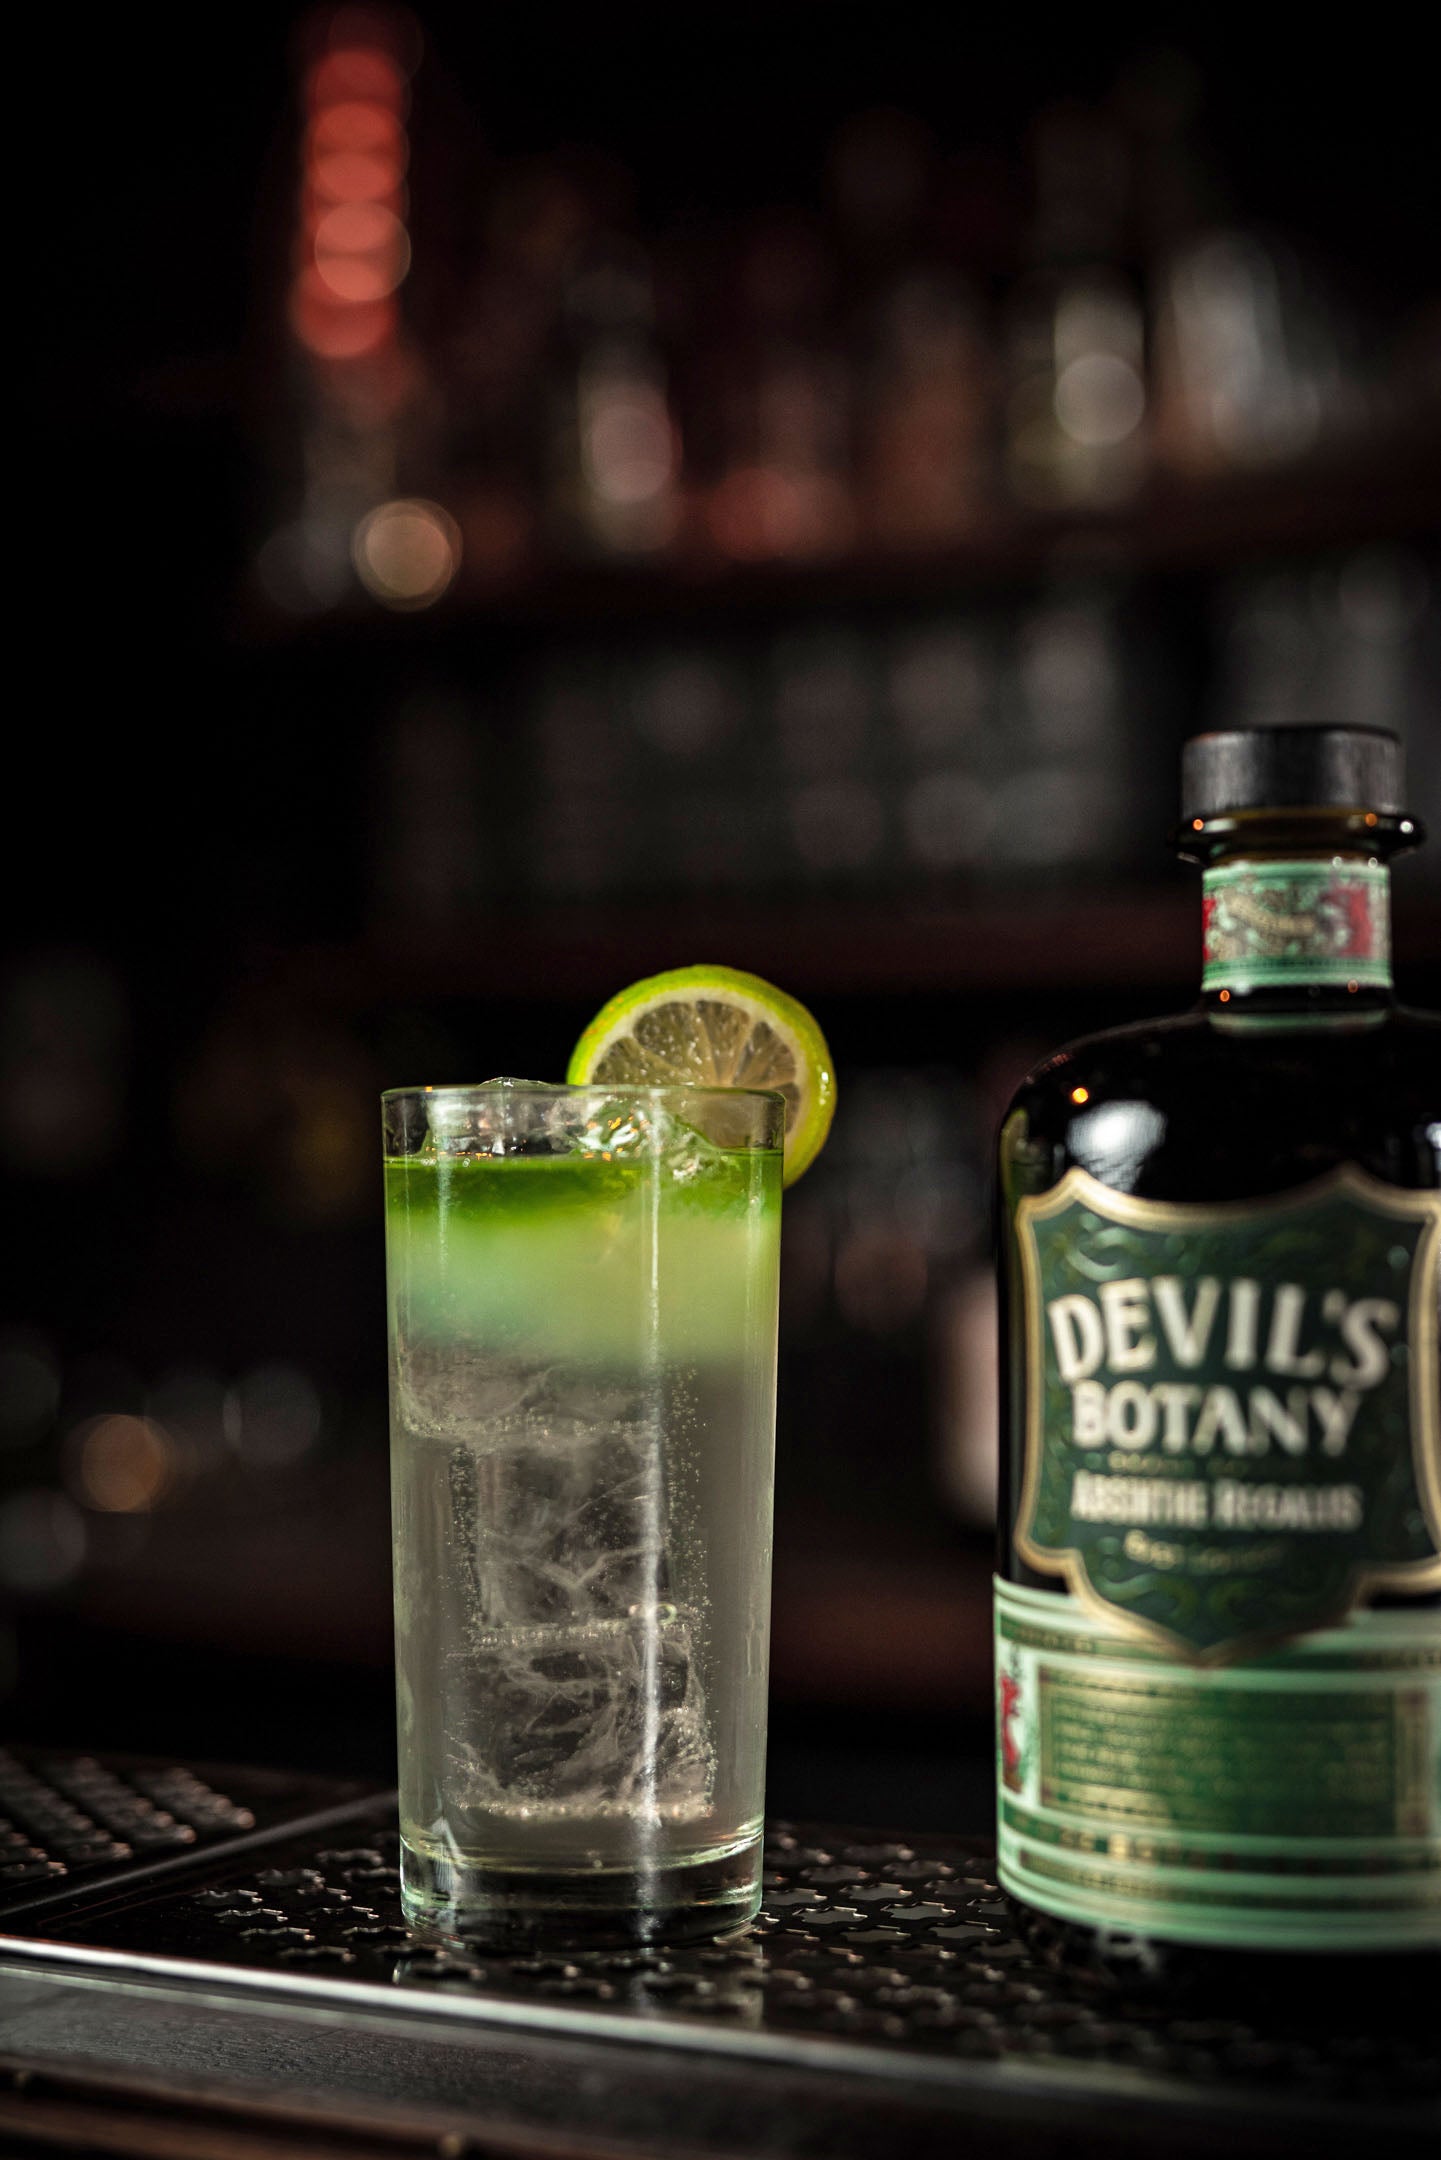 Devil's Botany Absinthe Regalis and Ginger Beer - Absinthe Cocktails - How to Drink Absinthe - London Absinthe Distillery